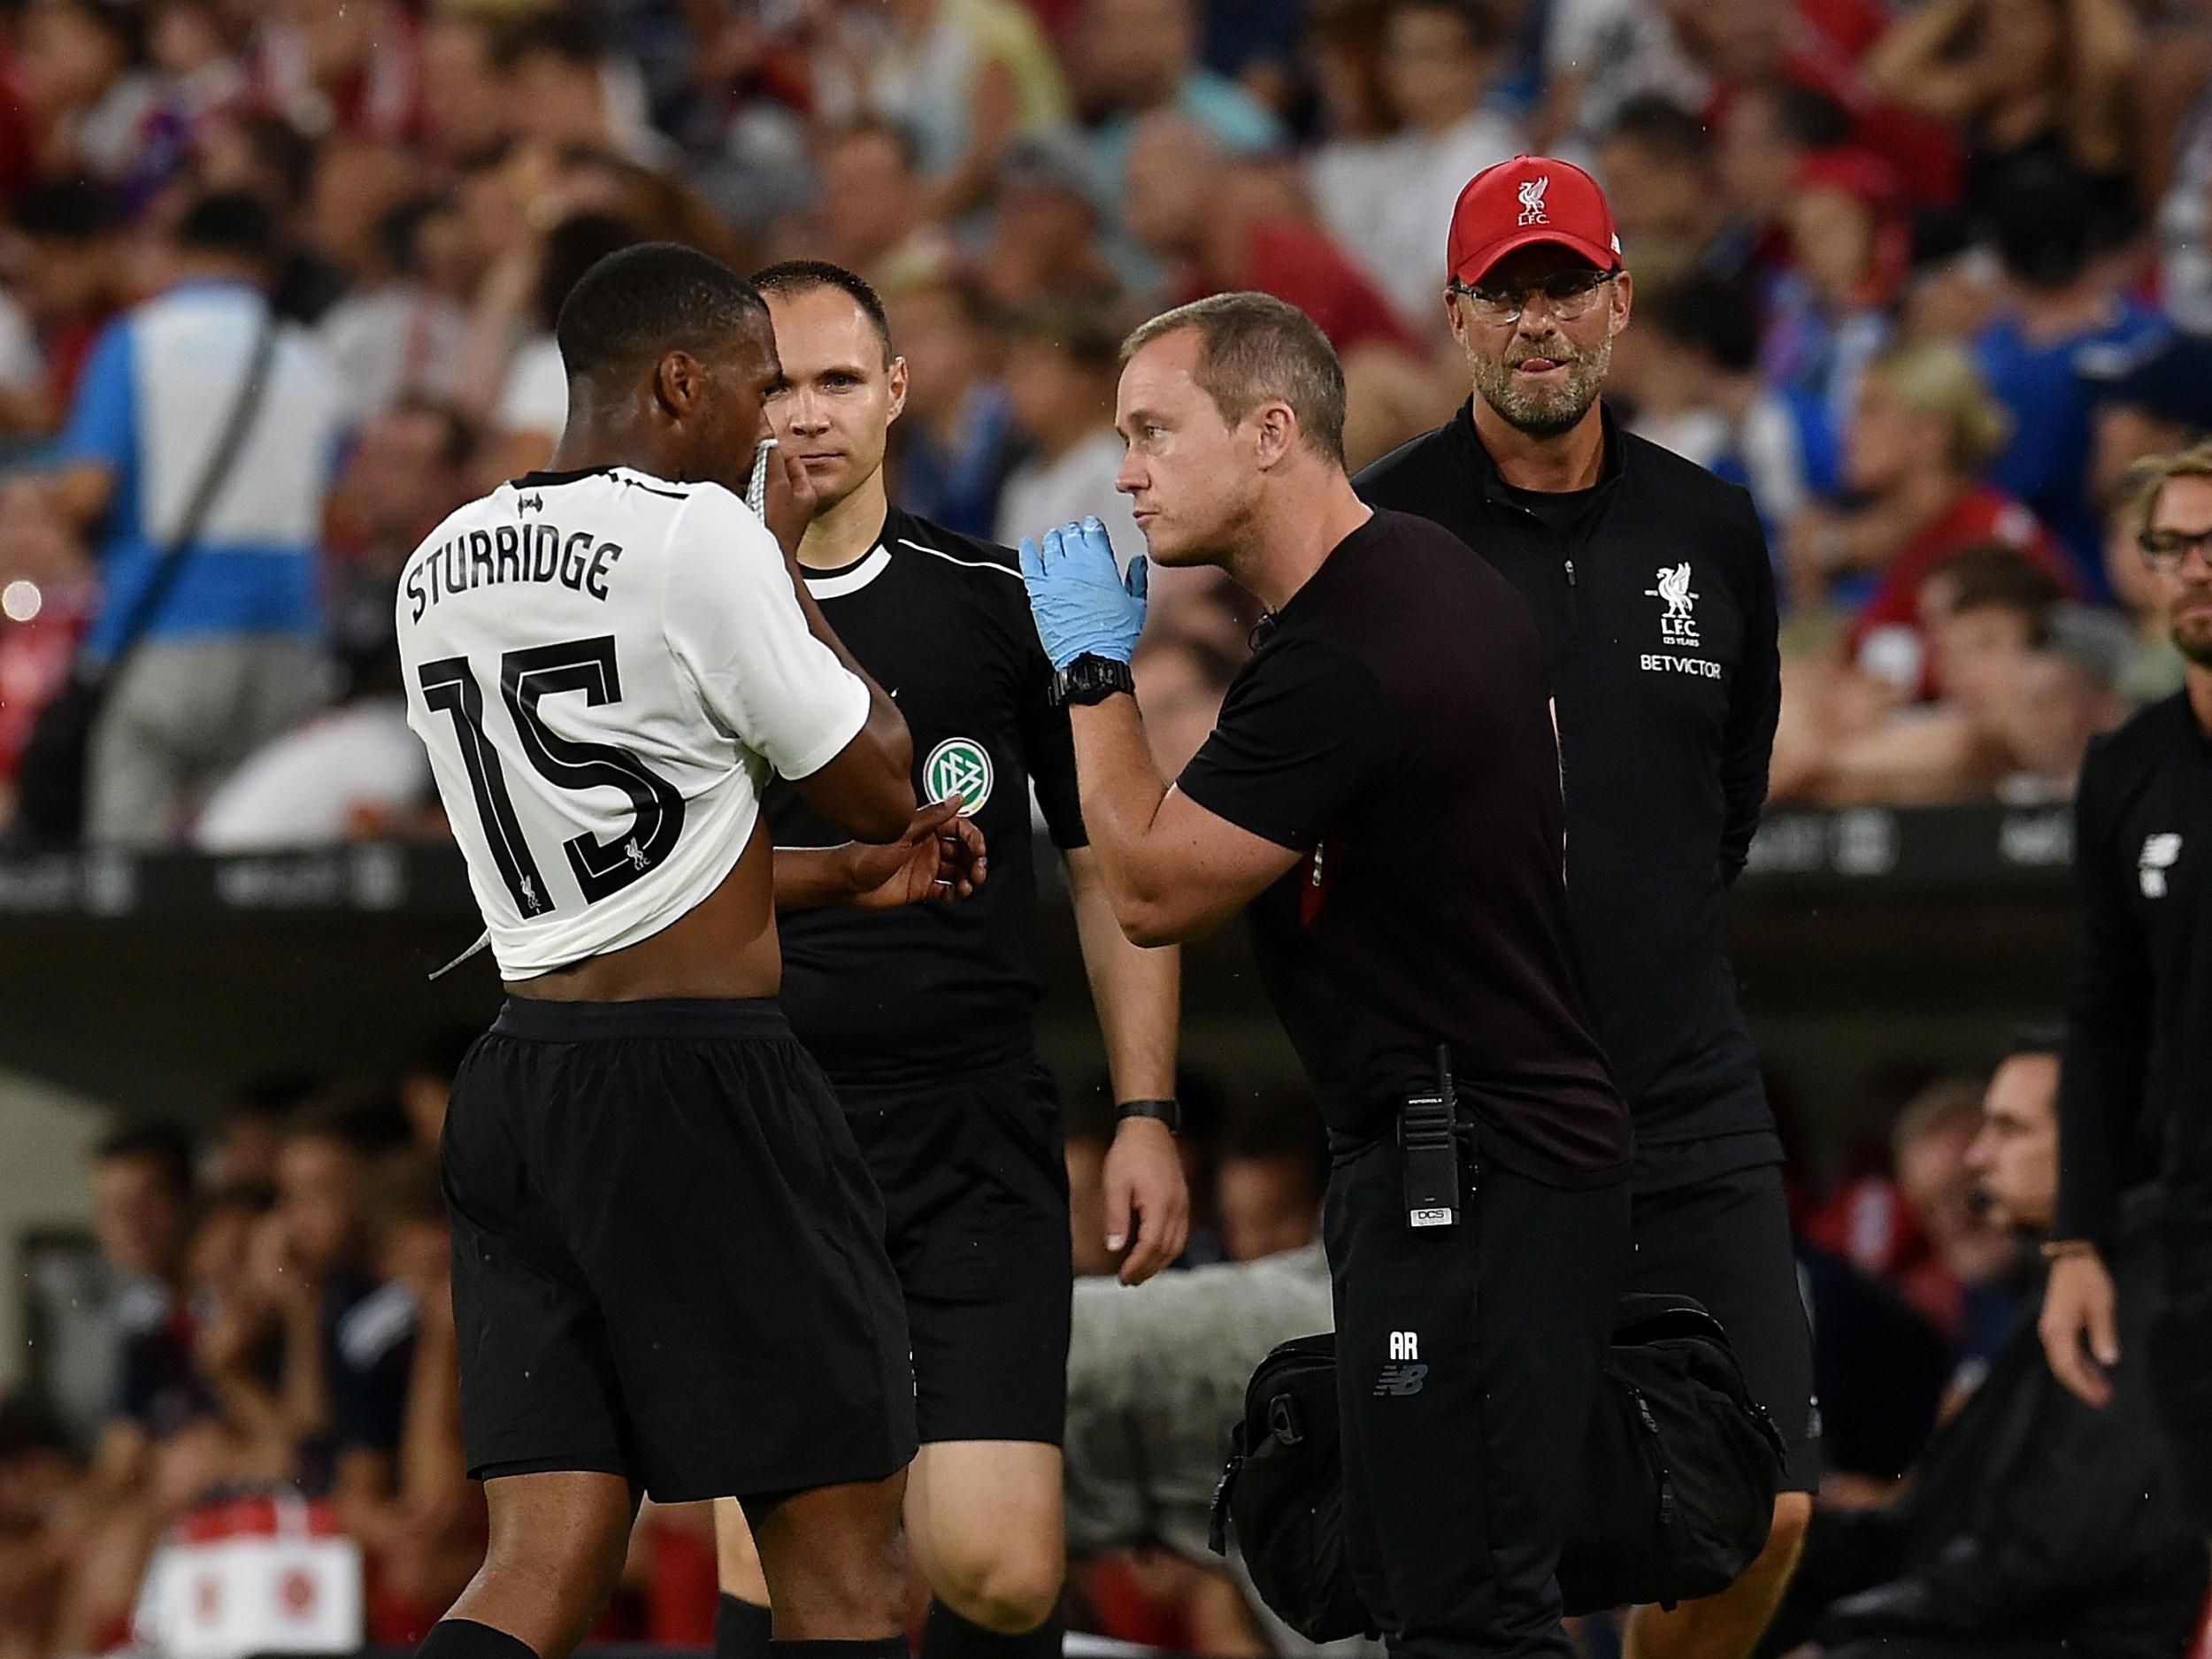 Daniel Sturridge was replaced by summer signing Dominic Solanke late on